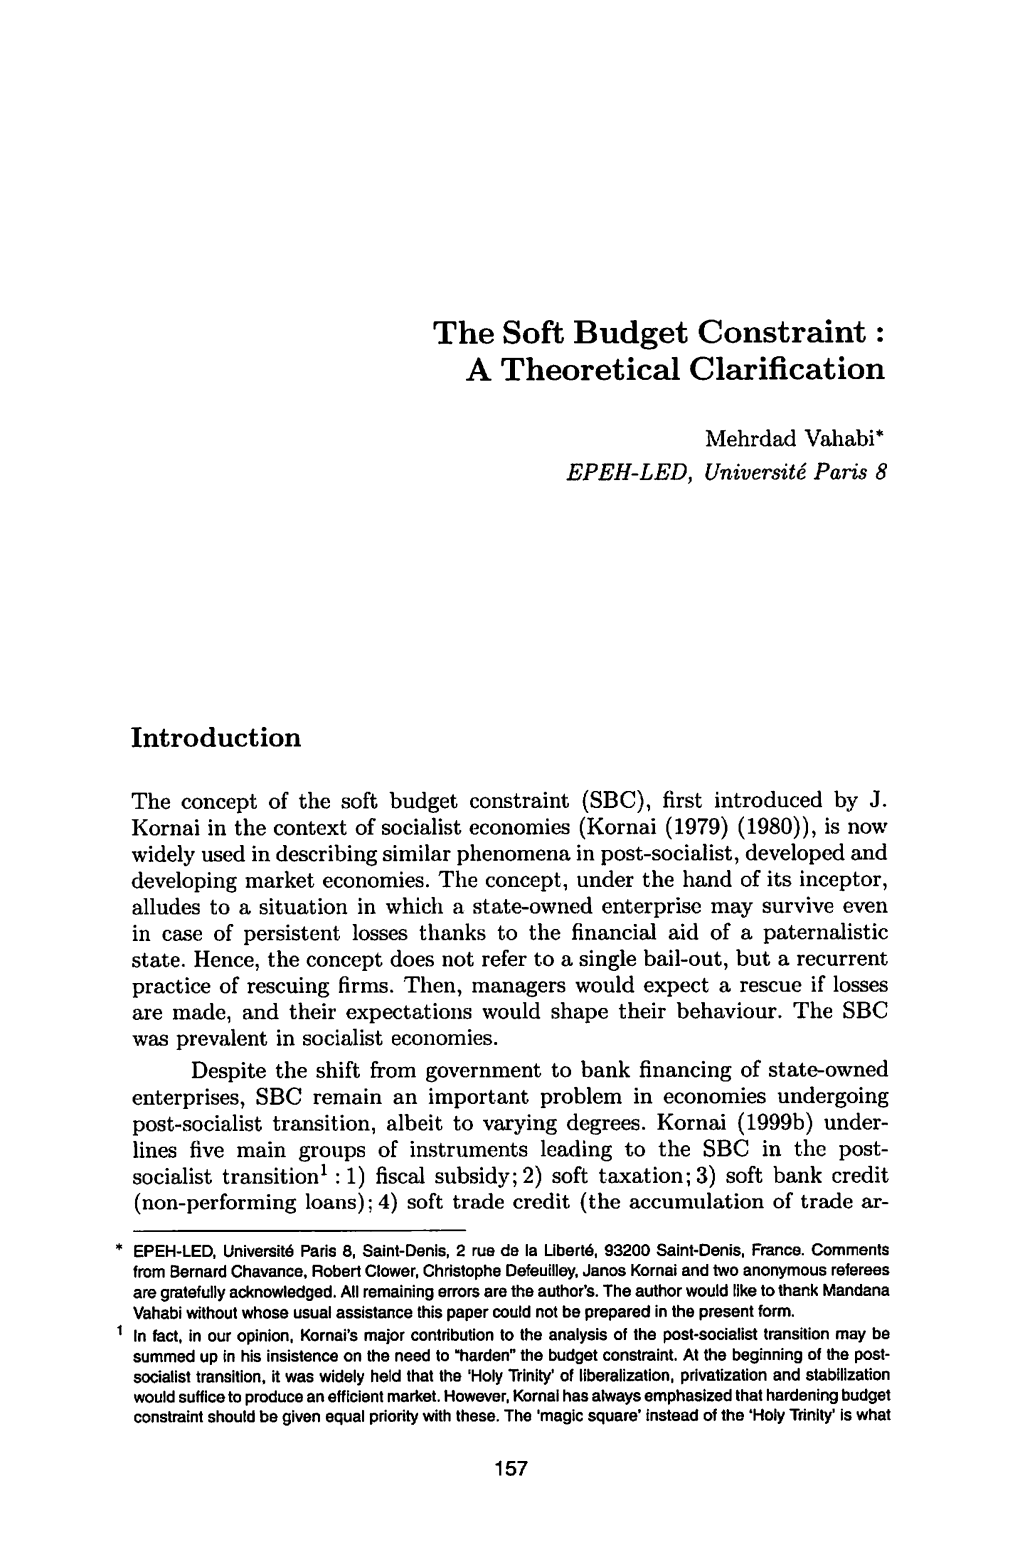 The Soft Budget Constraint : a Theoretical Clarification